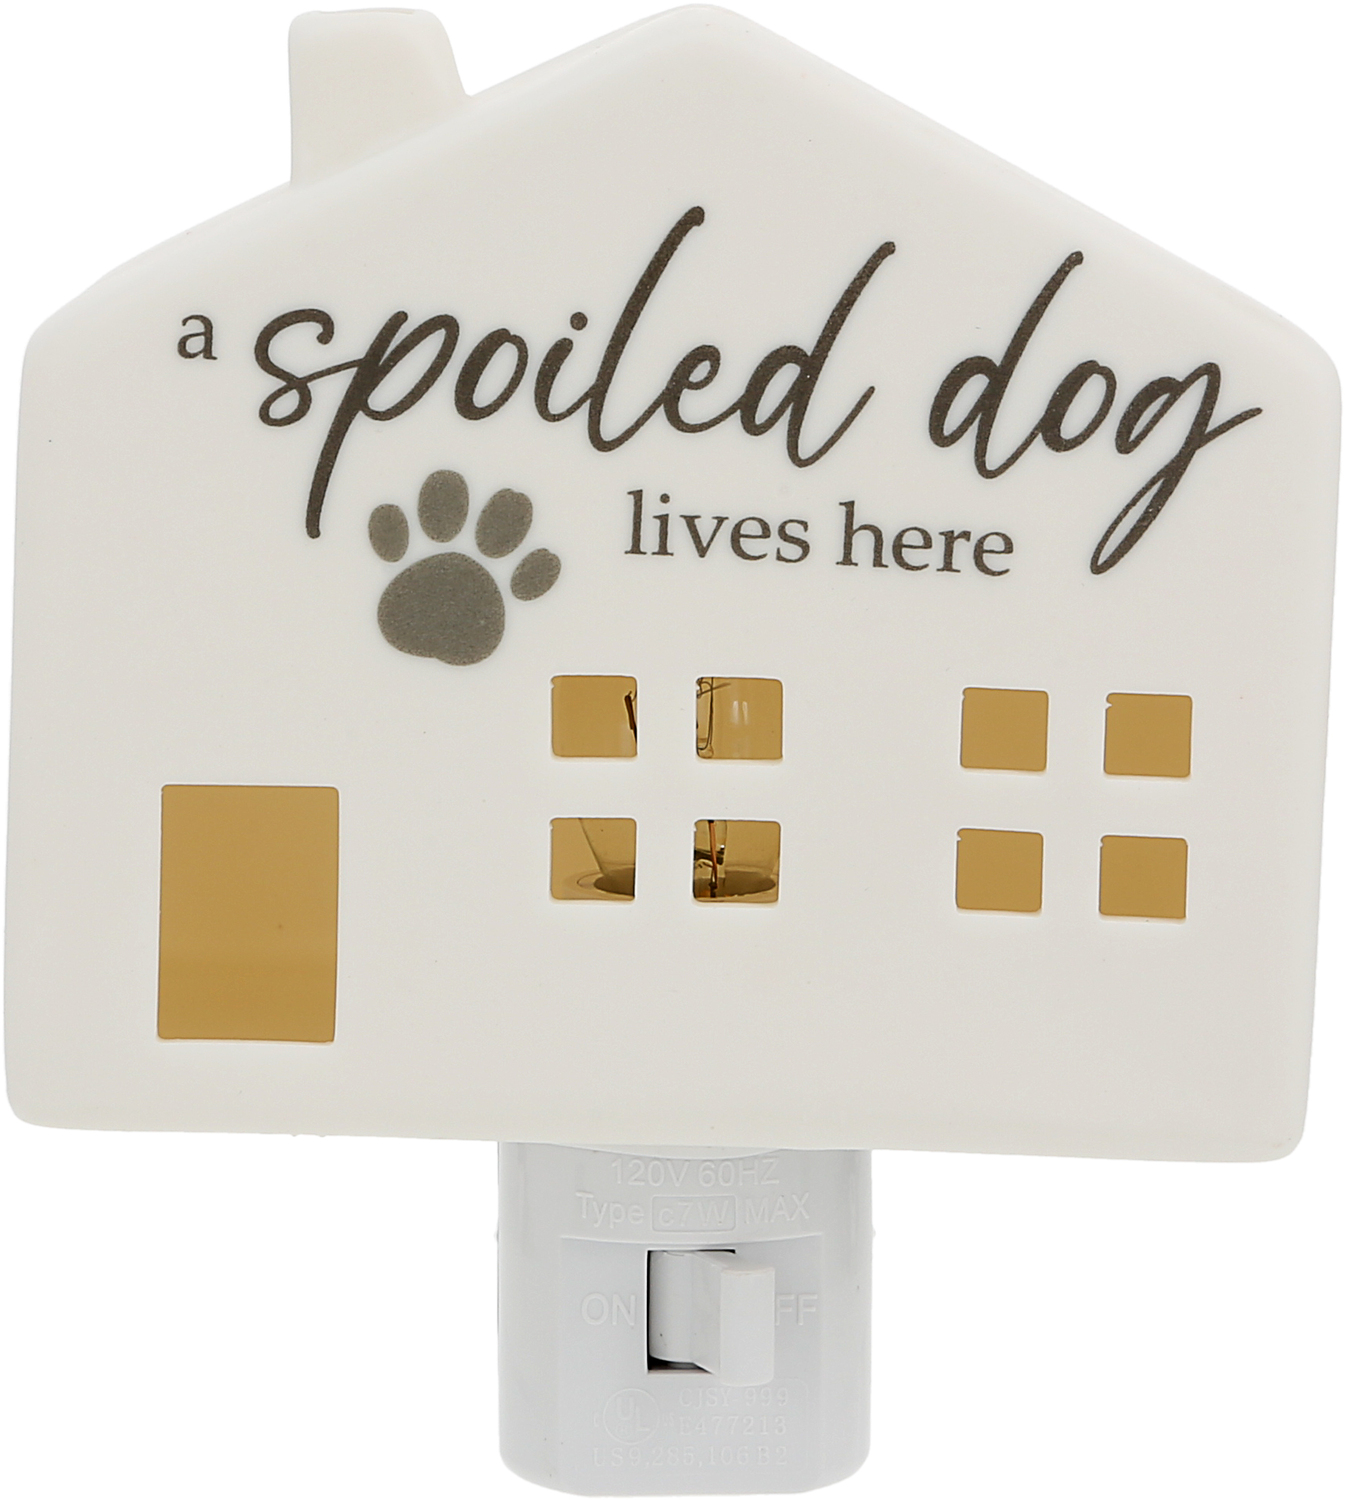 Spoiled Dog by Thoughts of Home - Spoiled Dog - 3.5" Ceramic Night Light